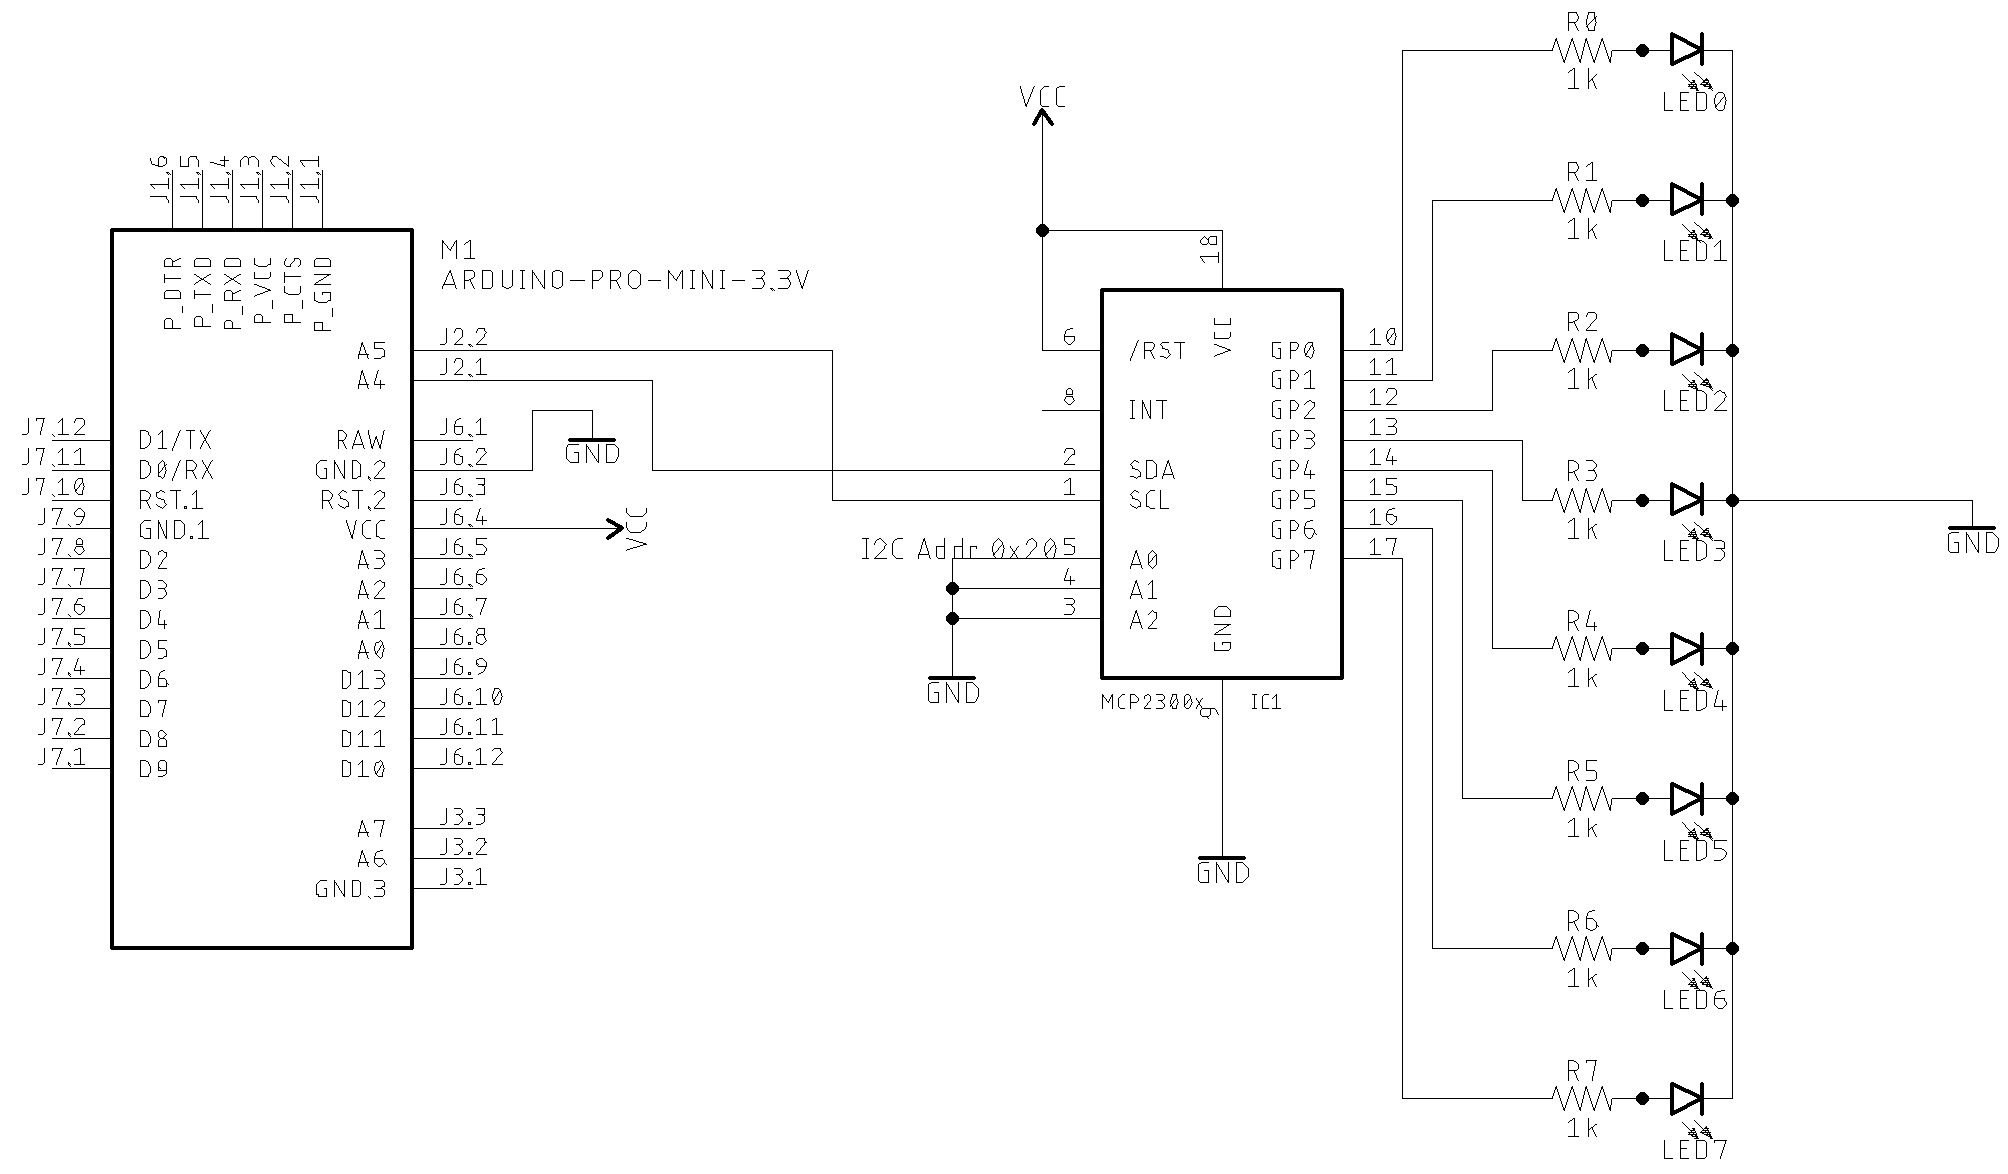 Basic Schematic with LEDs